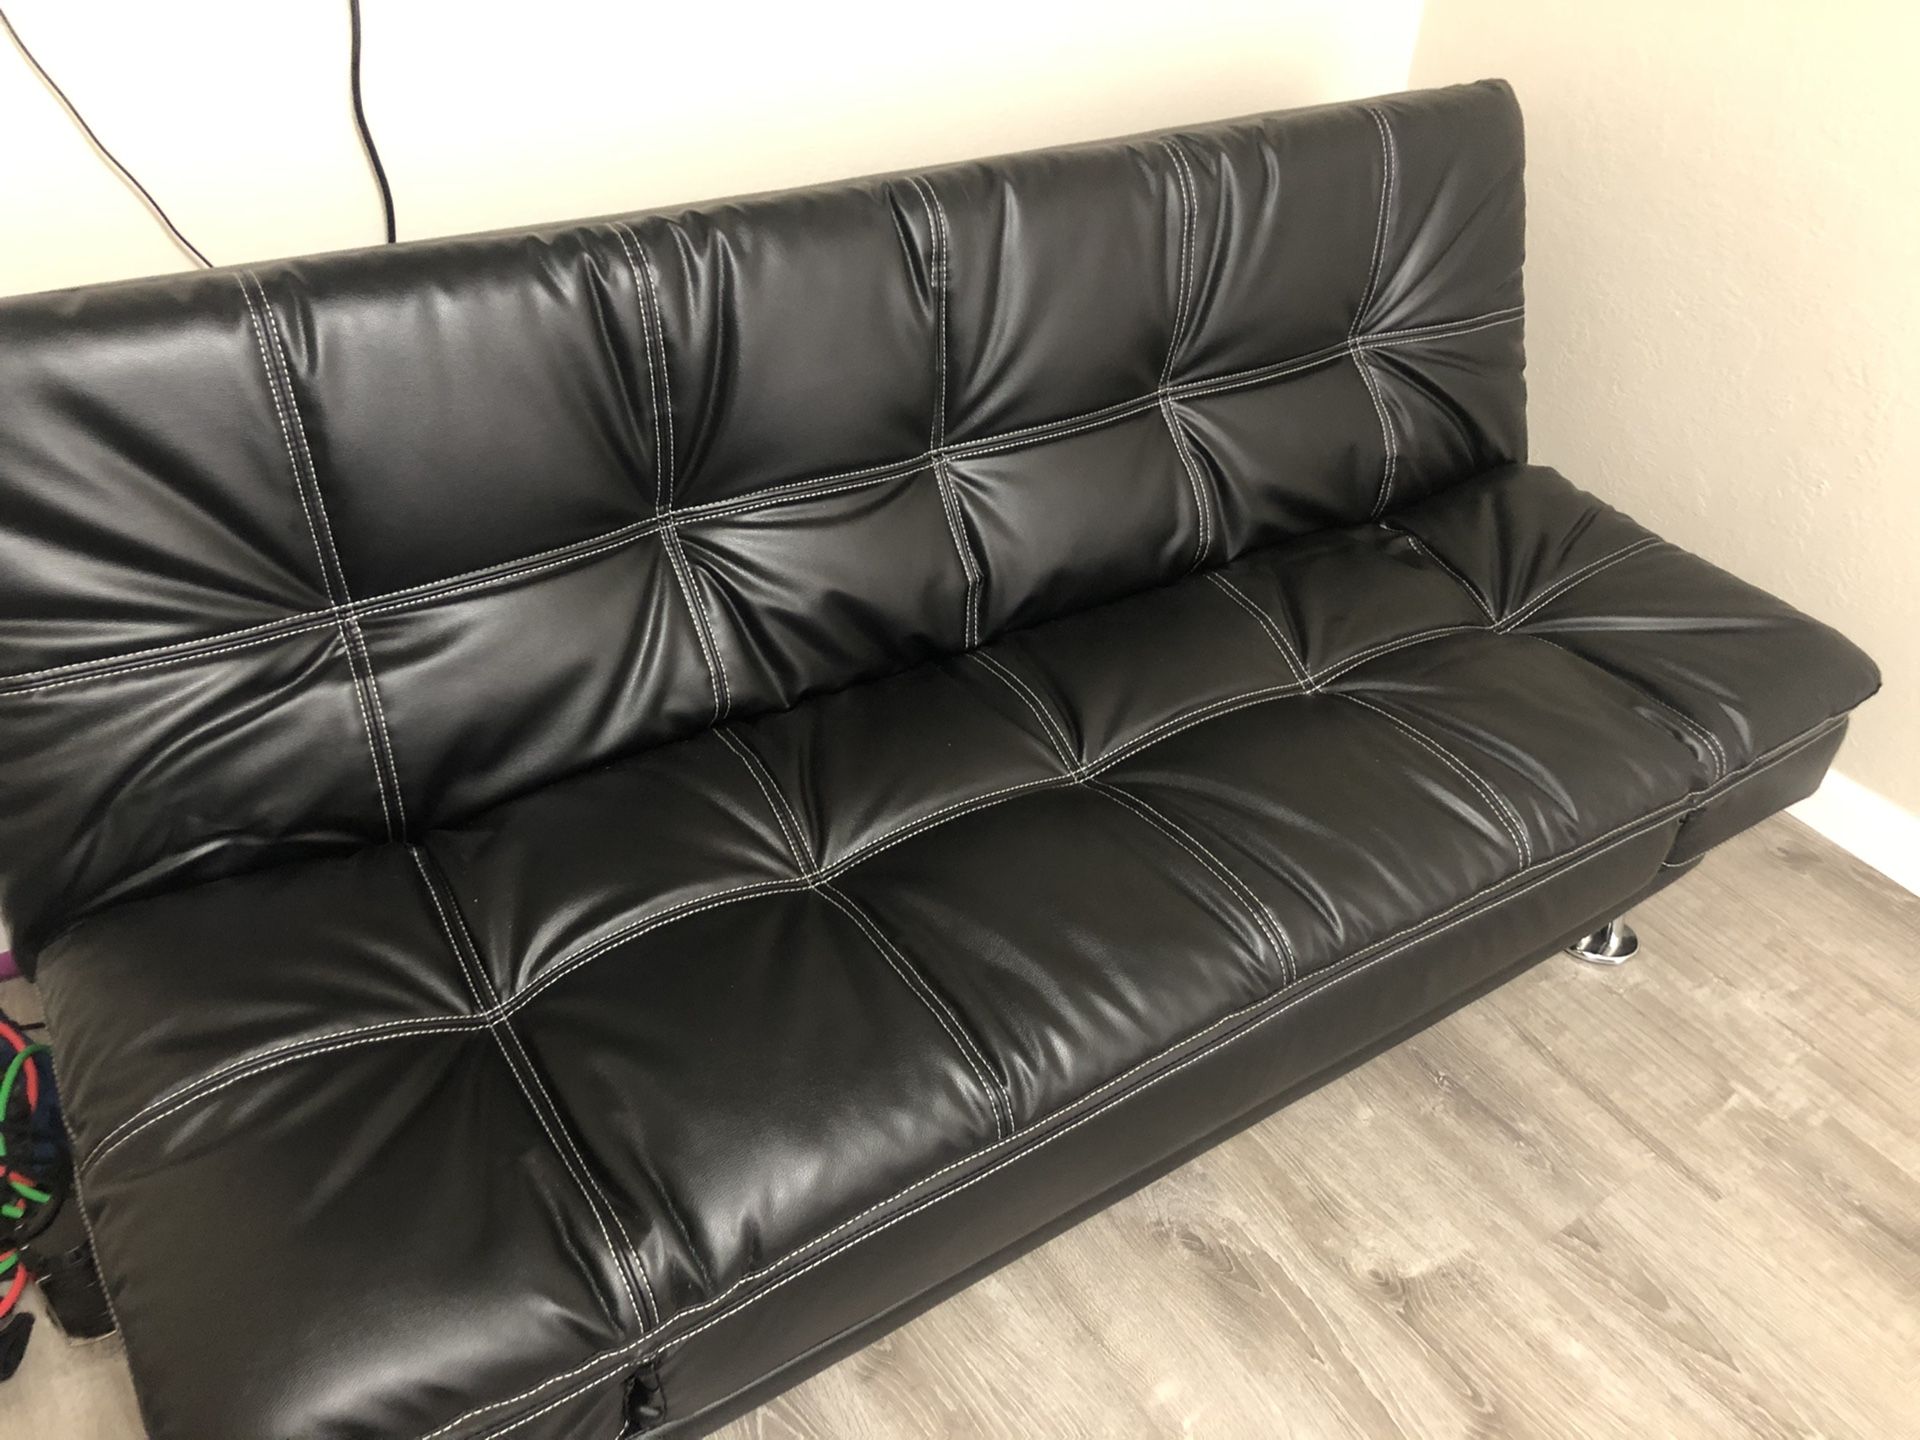 LIKE NEW Futon, Couch, Day Bed